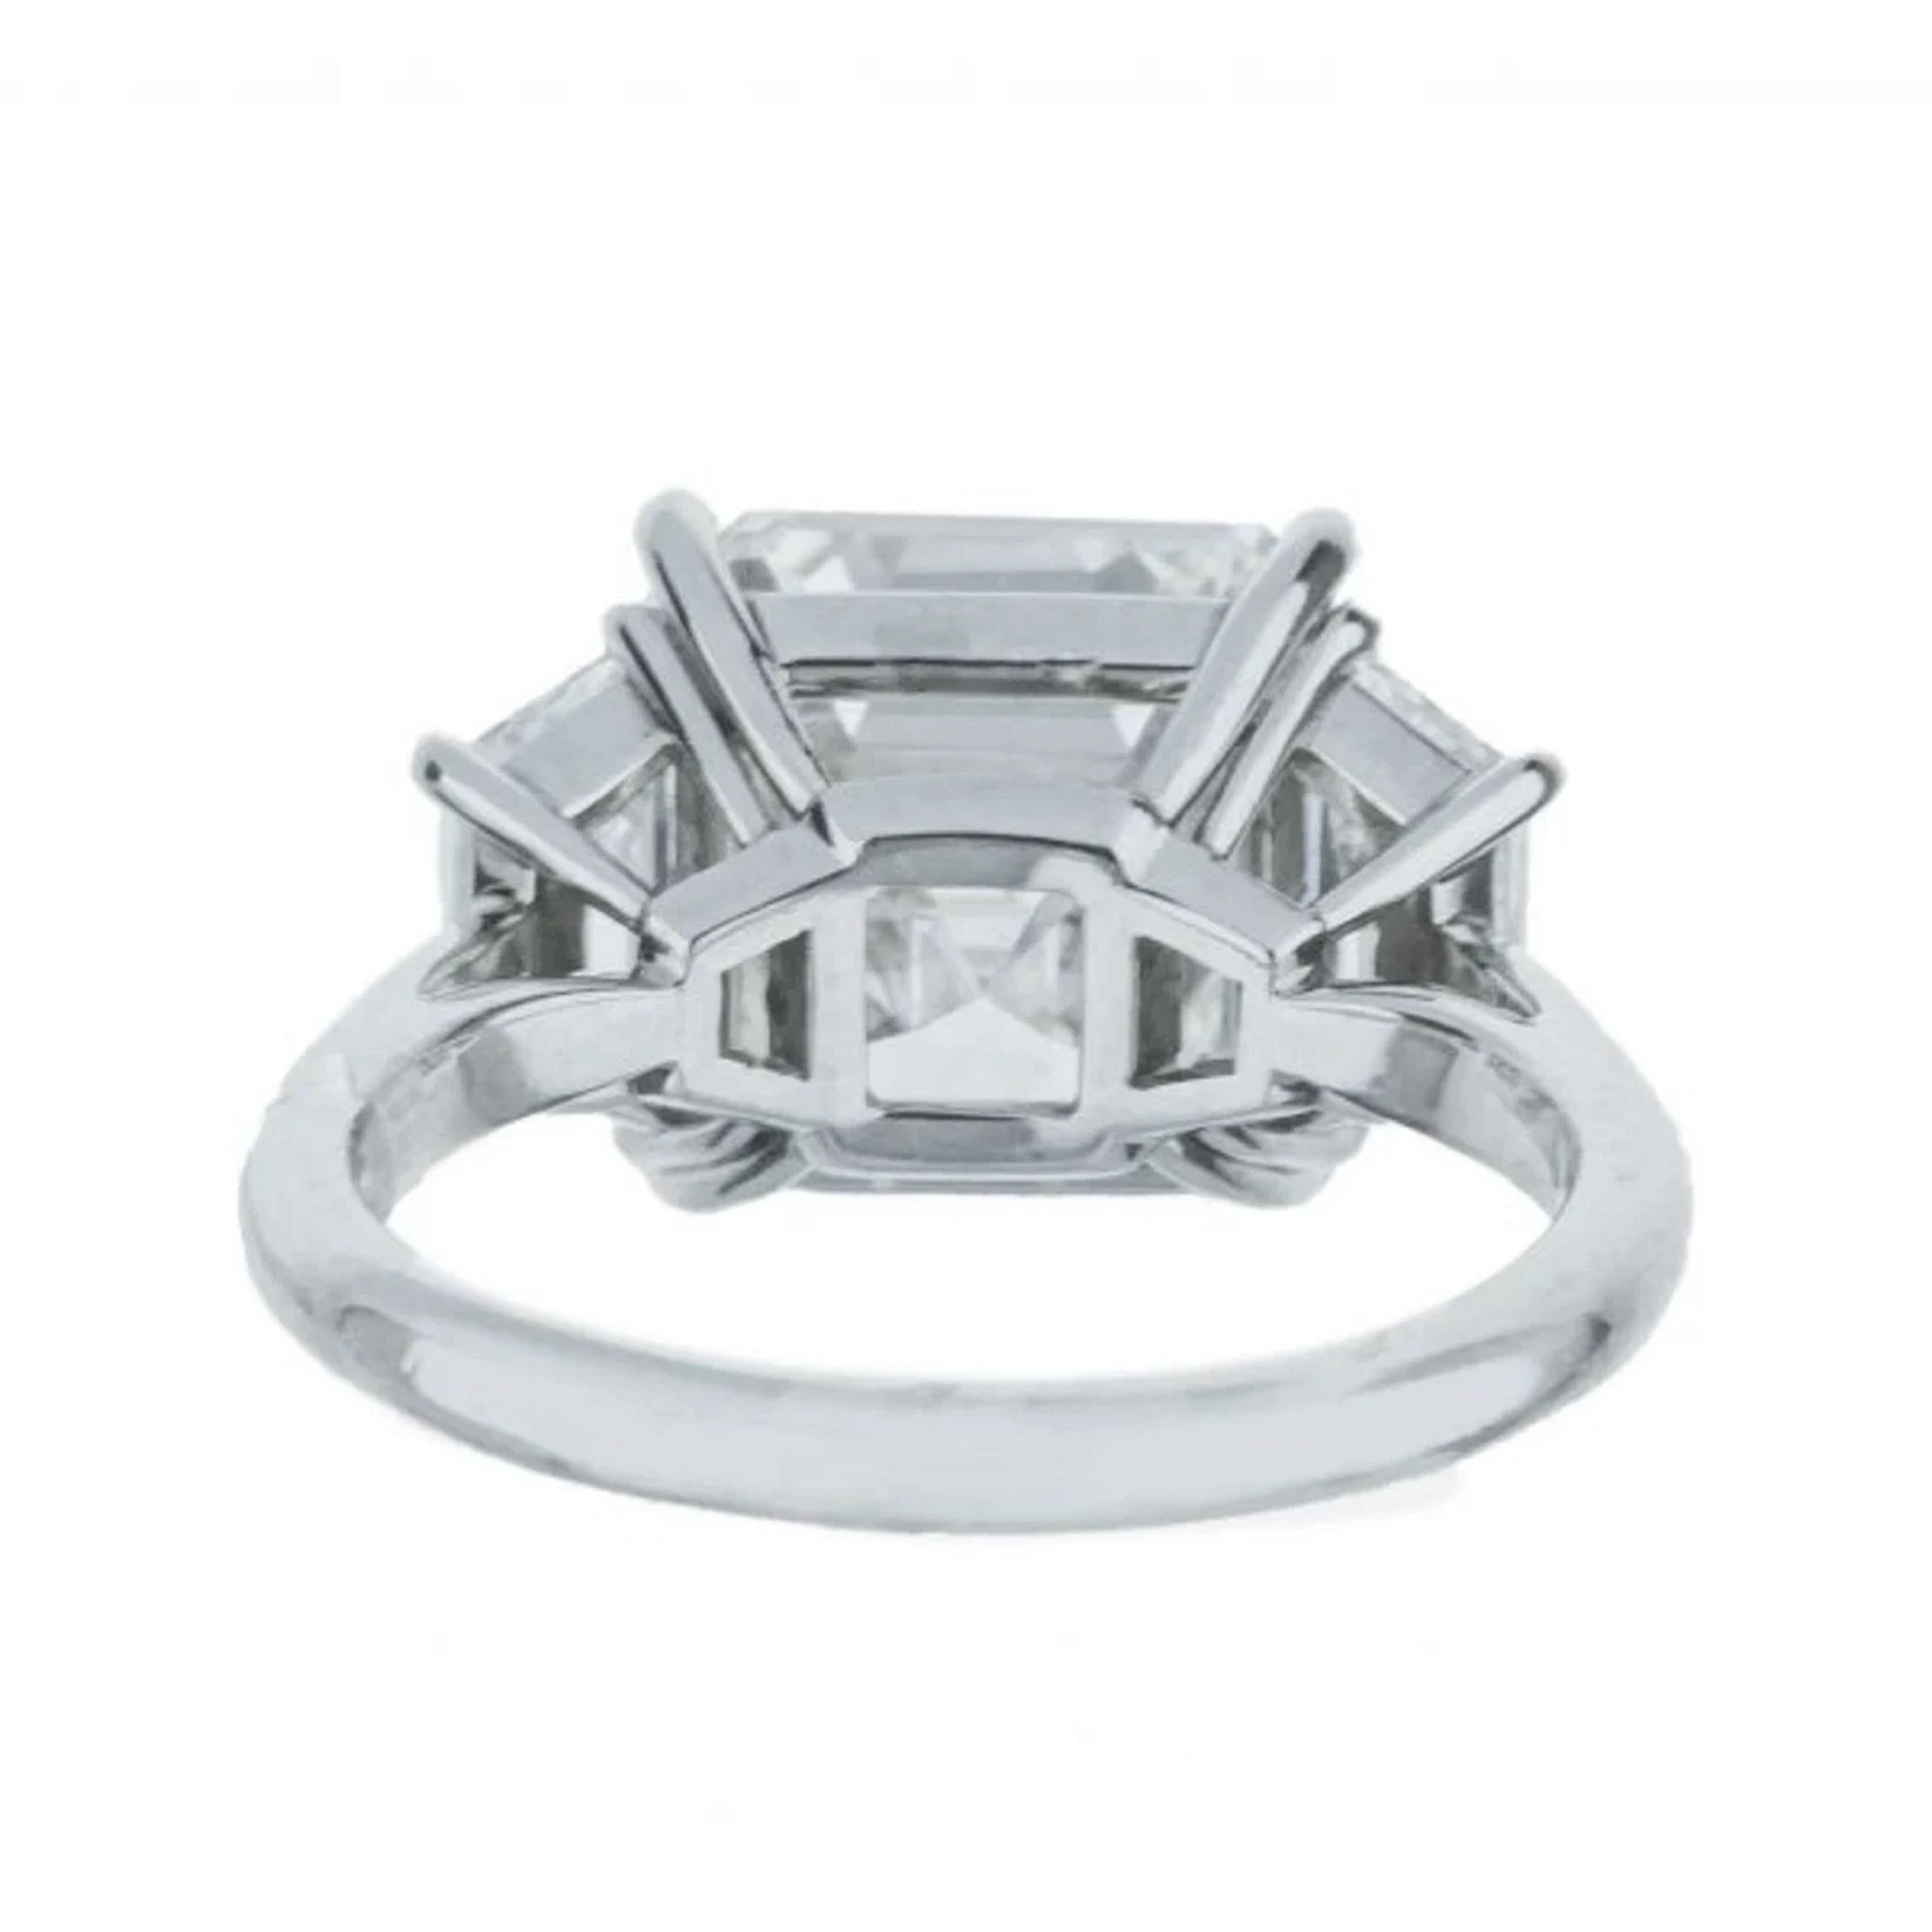 An amazing and clear asscher cut diamond certified by GIA 
4 CARATS
VVS2
H COLOR 
EXCELLENT CUT